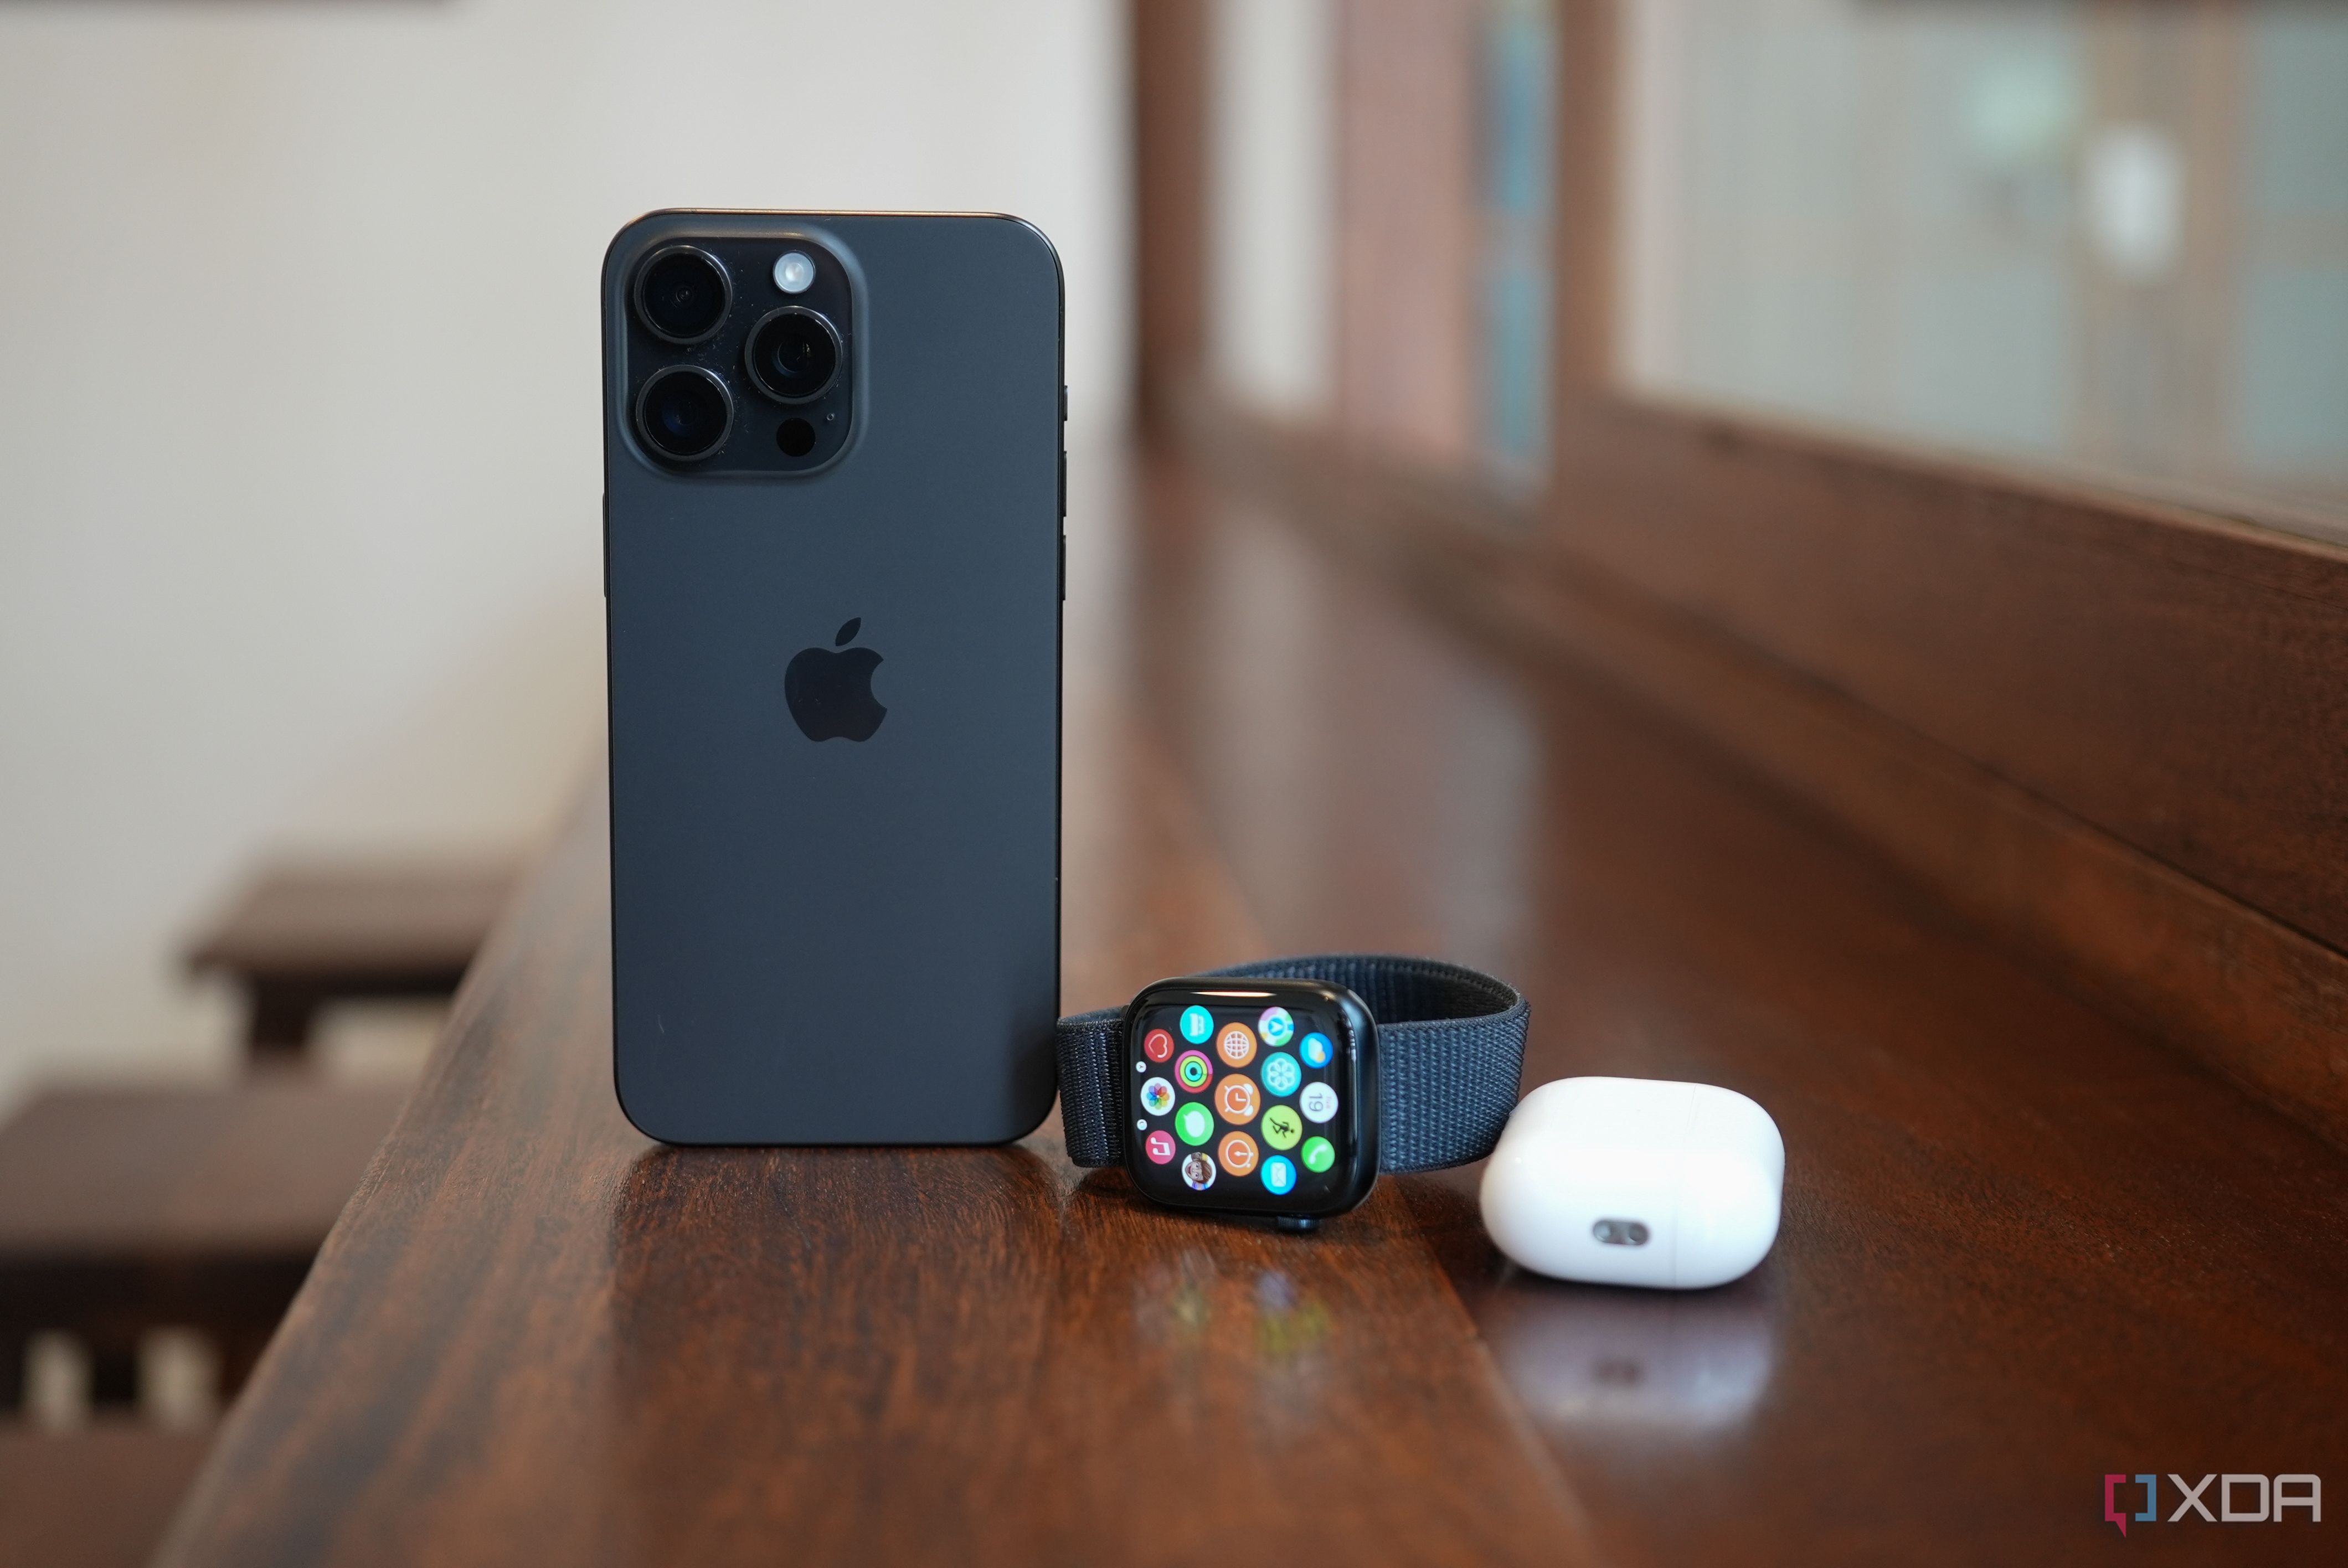 Apple Watch Series 9 next to an iPhone and AirPods Pro 2 case